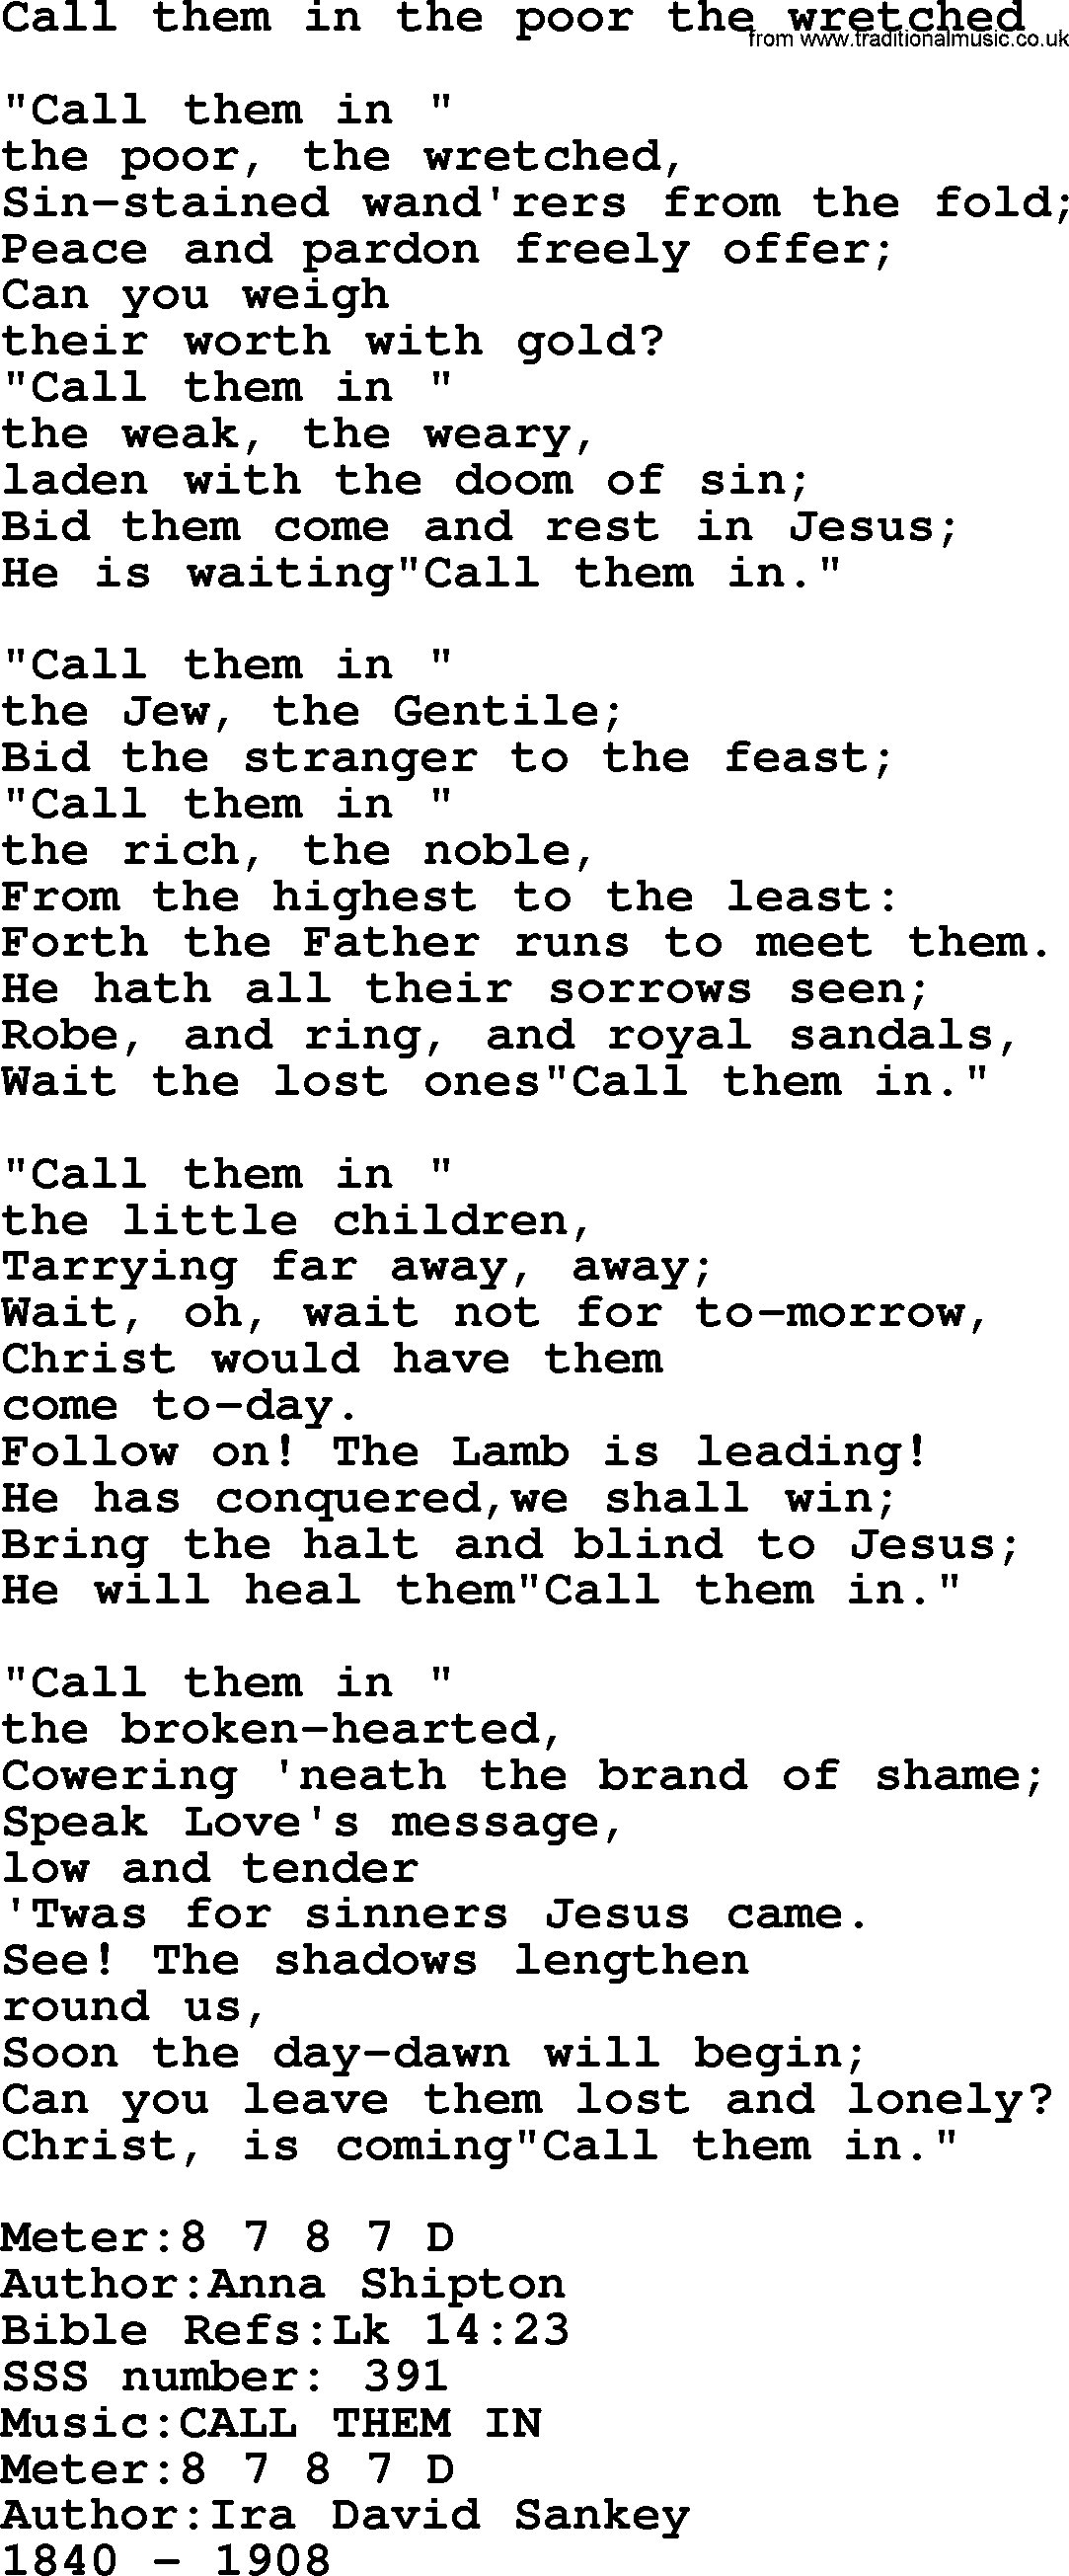 Sacred Songs and Solos complete, 1200 Hymns, title: Call Them In The Poor The Wretched, lyrics and PDF